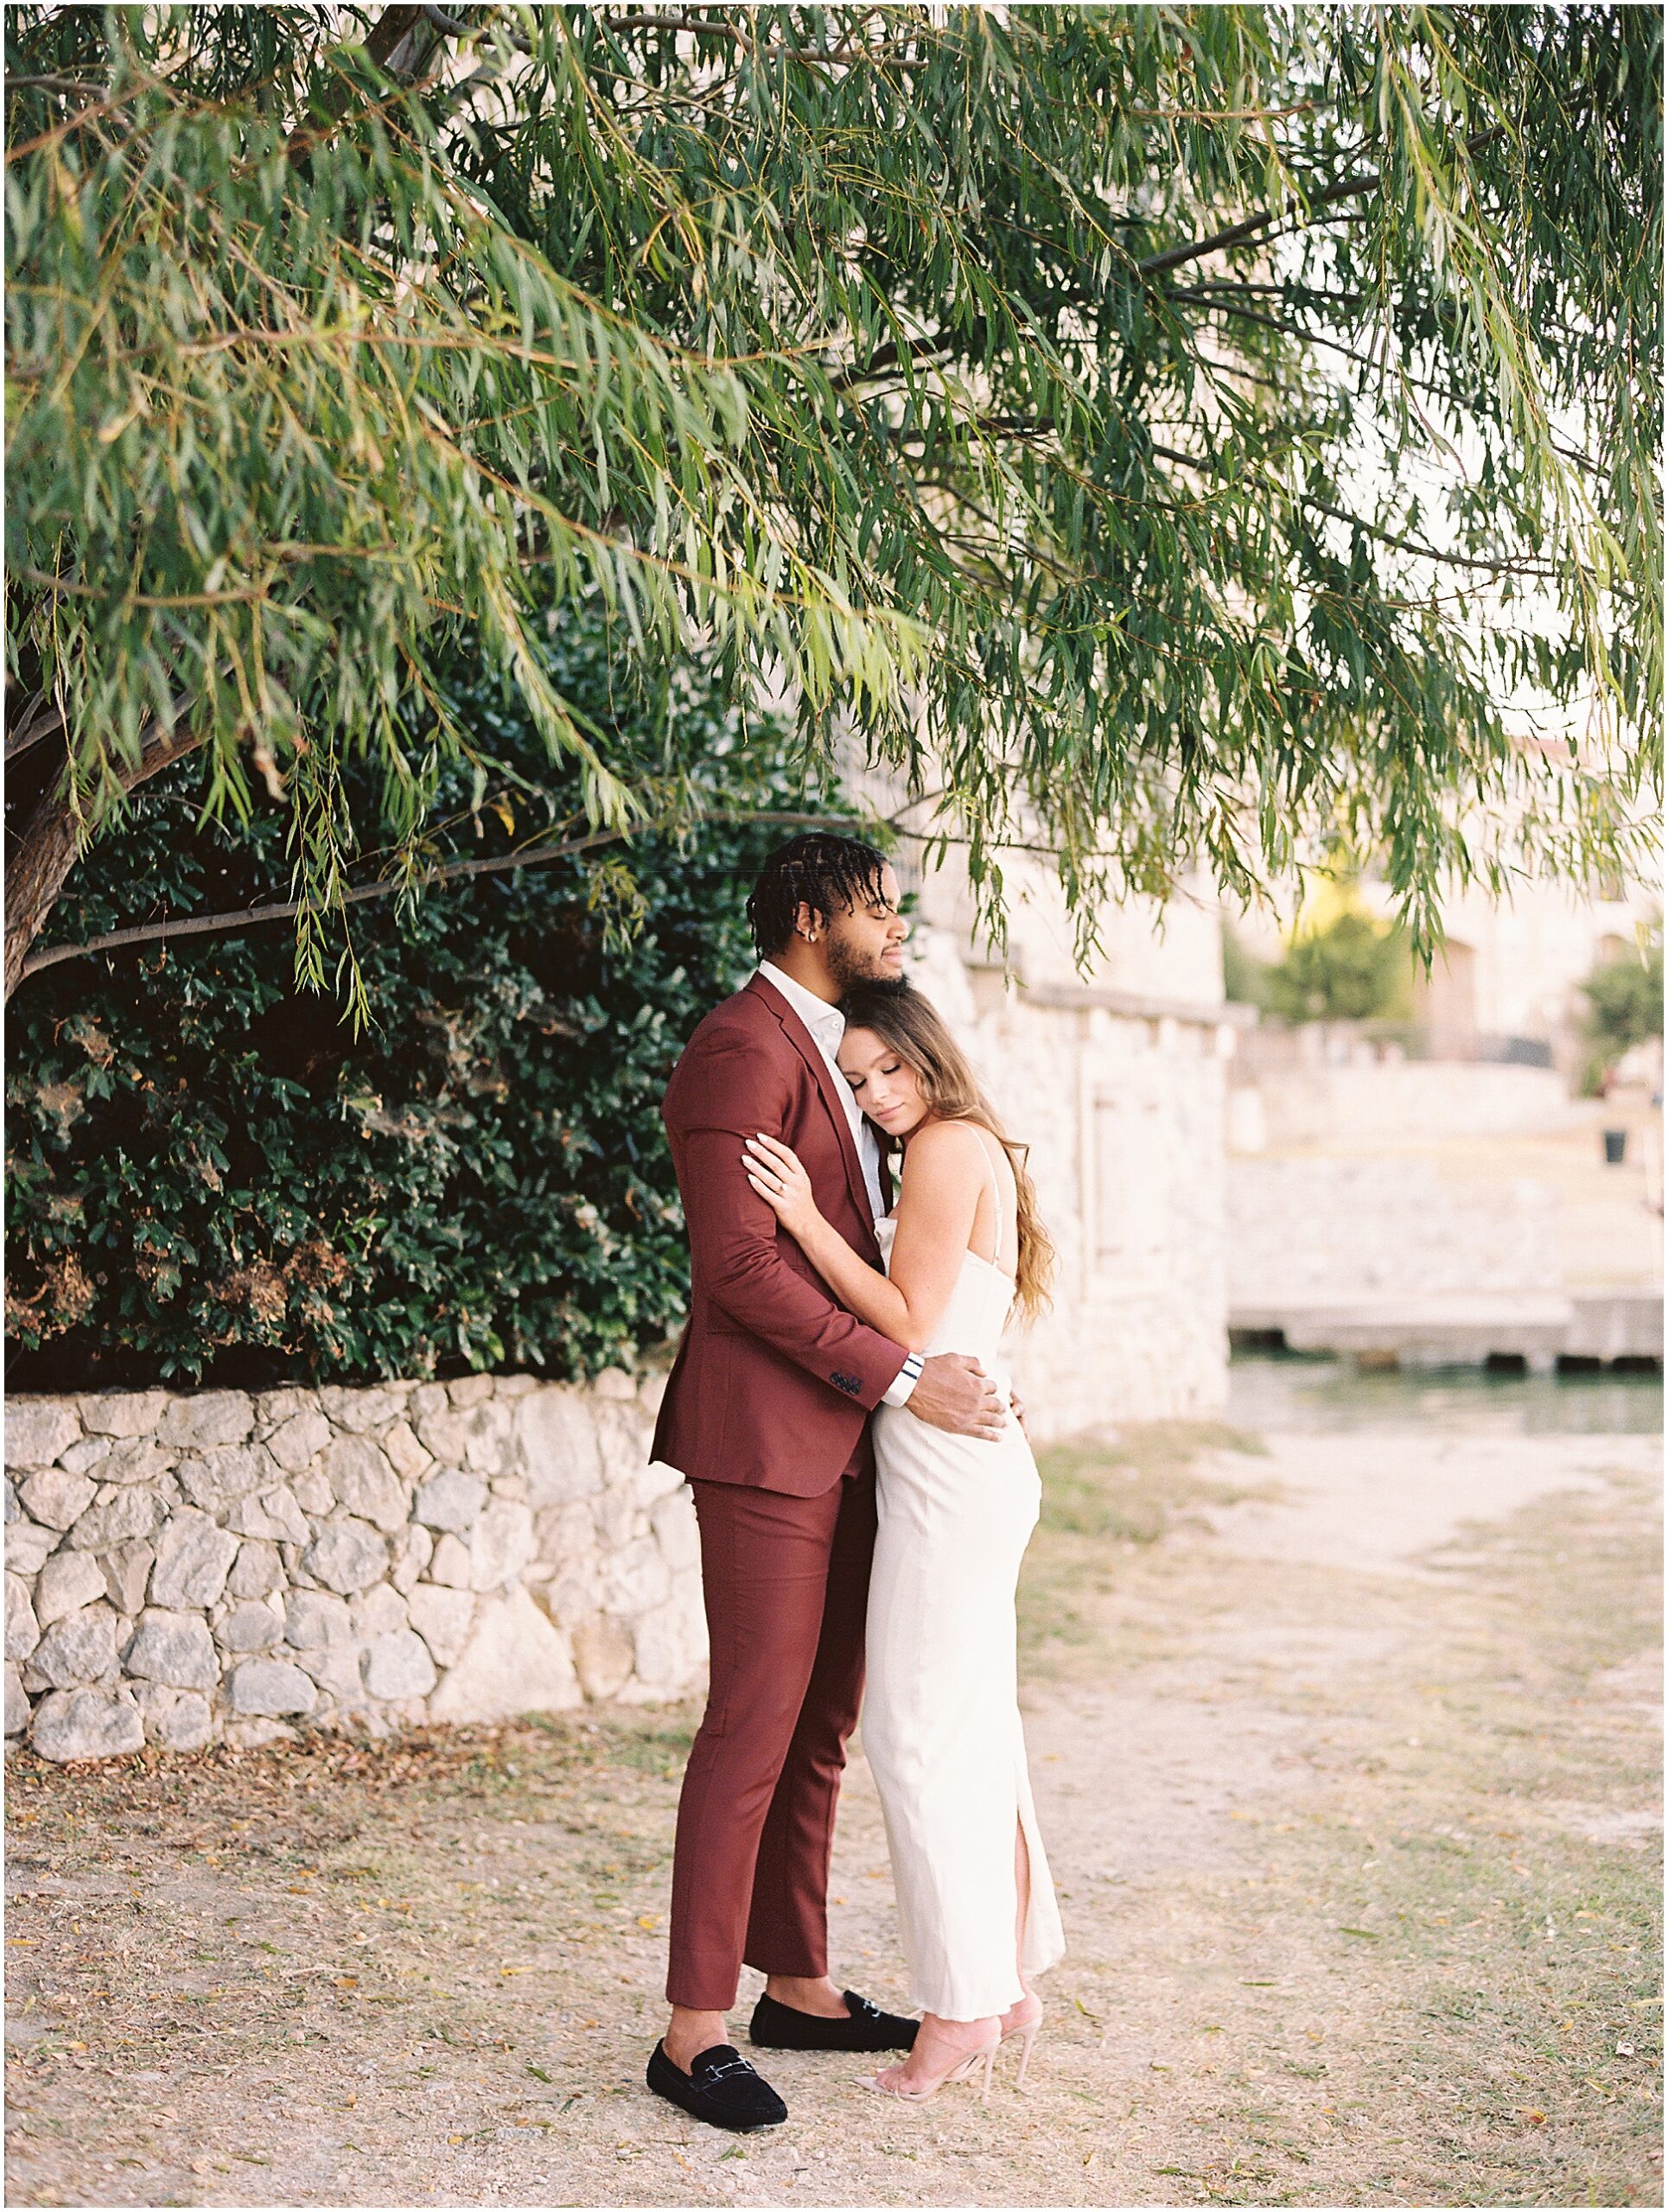 Chic, stylish european inspired engagement session at Adriatica village